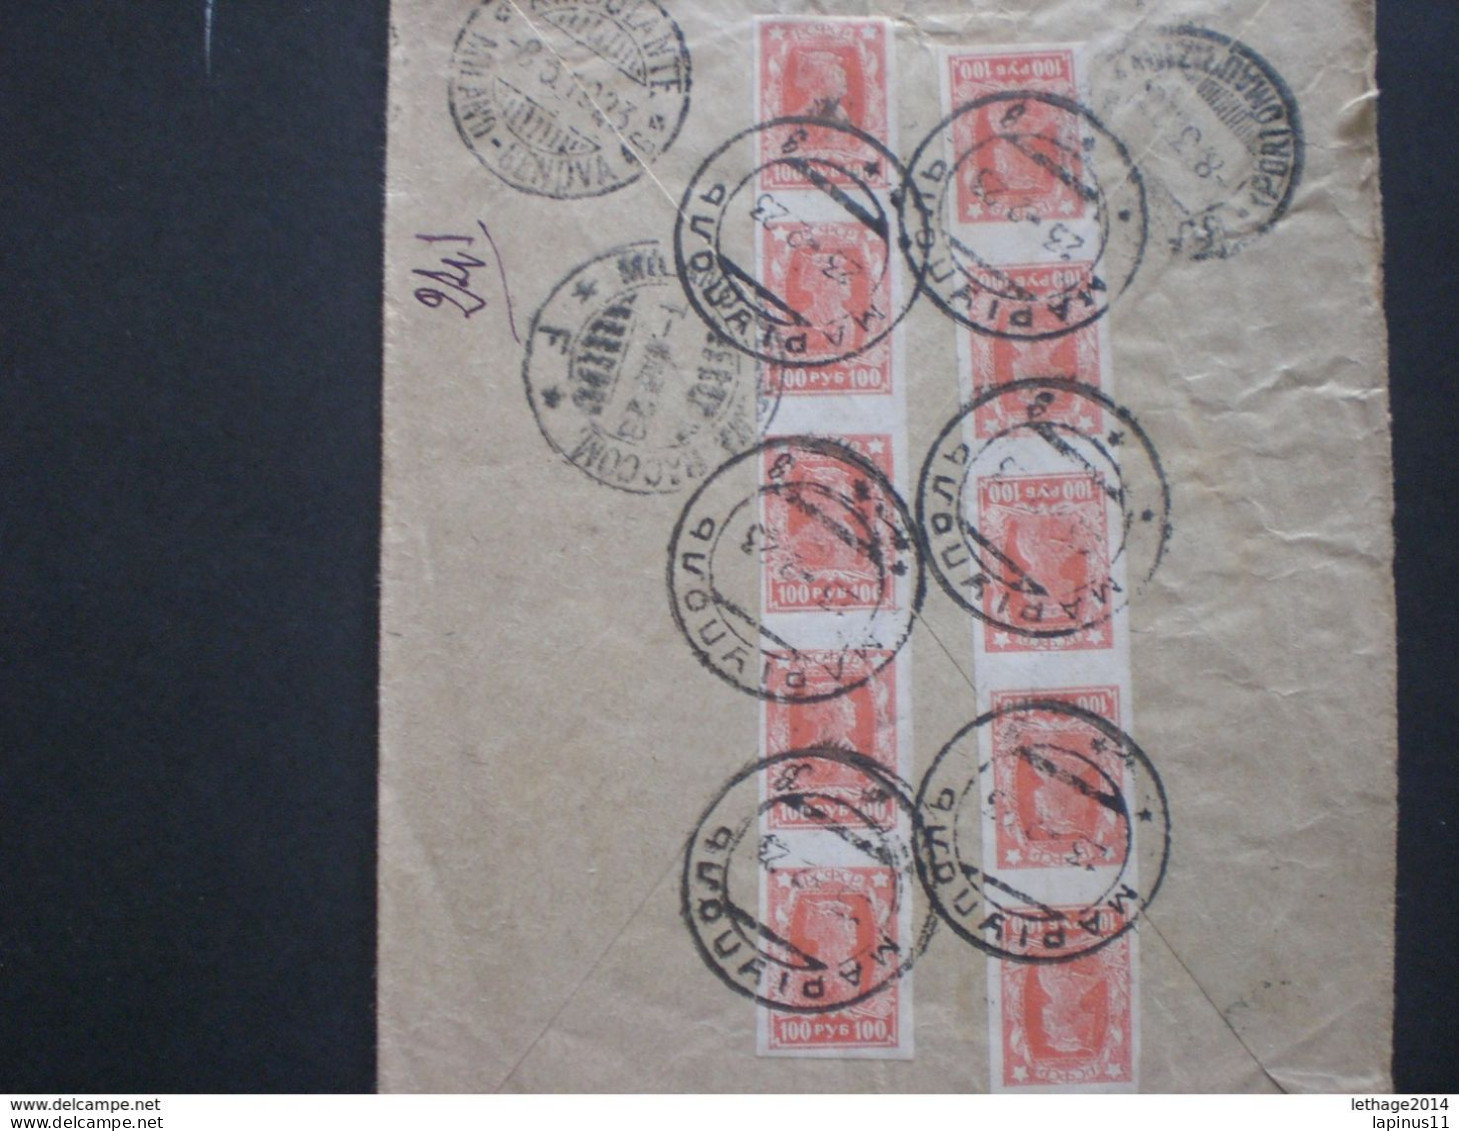 RUSSIA RUSSIE РОССИЯ STAMPS COVER 1923 REGISTER MAIL RUSSLAND TO ITALY OVER STAMPS RRR RIF. TAGG (178) - Brieven En Documenten